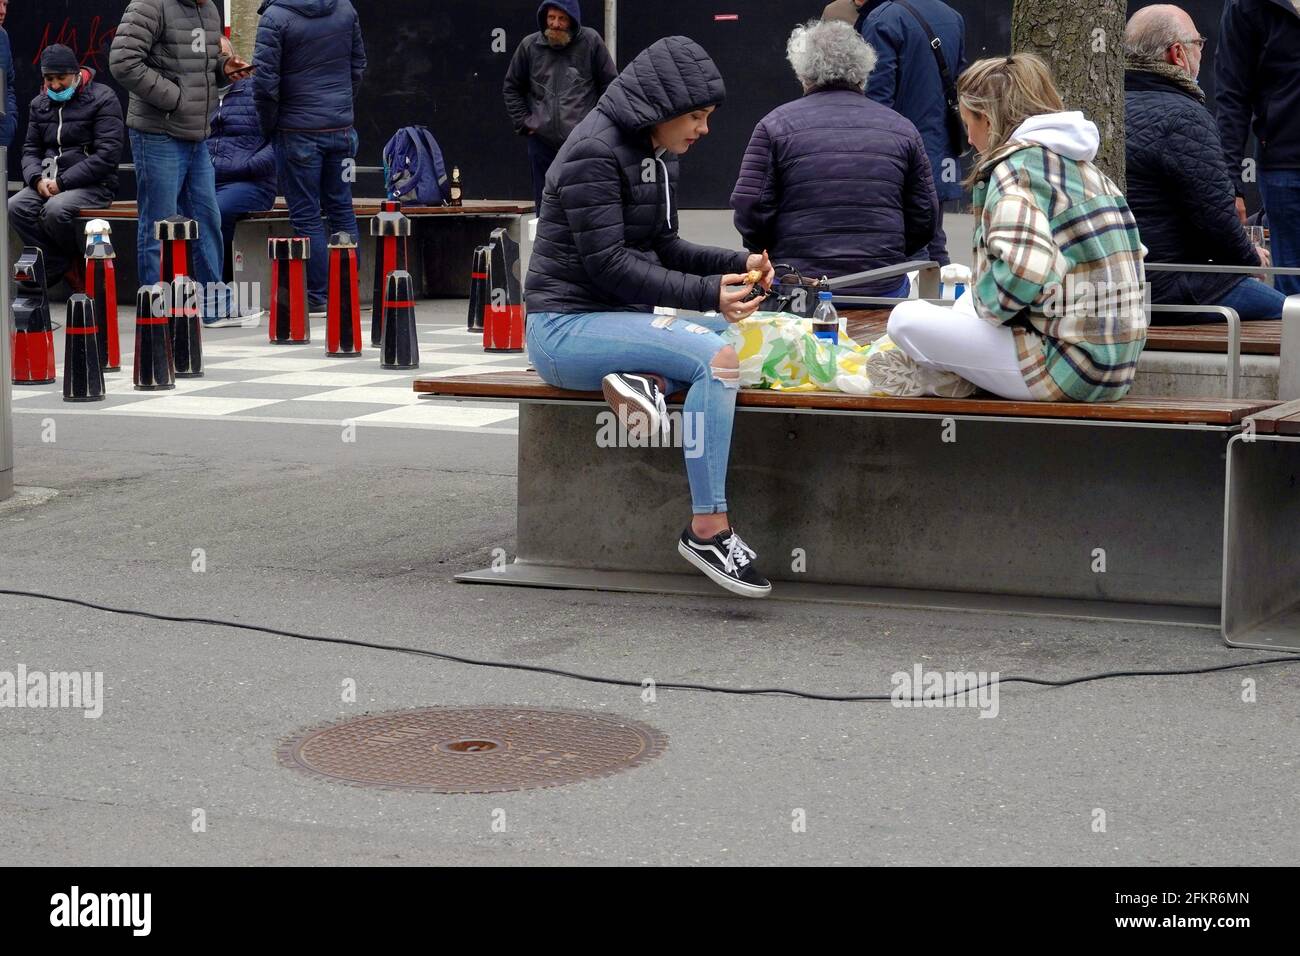 Street life in the city, in time of coronavirus and covid-19 crisis. People sit around, eat take away food, play chess and some of them wear face mask. Stock Photo